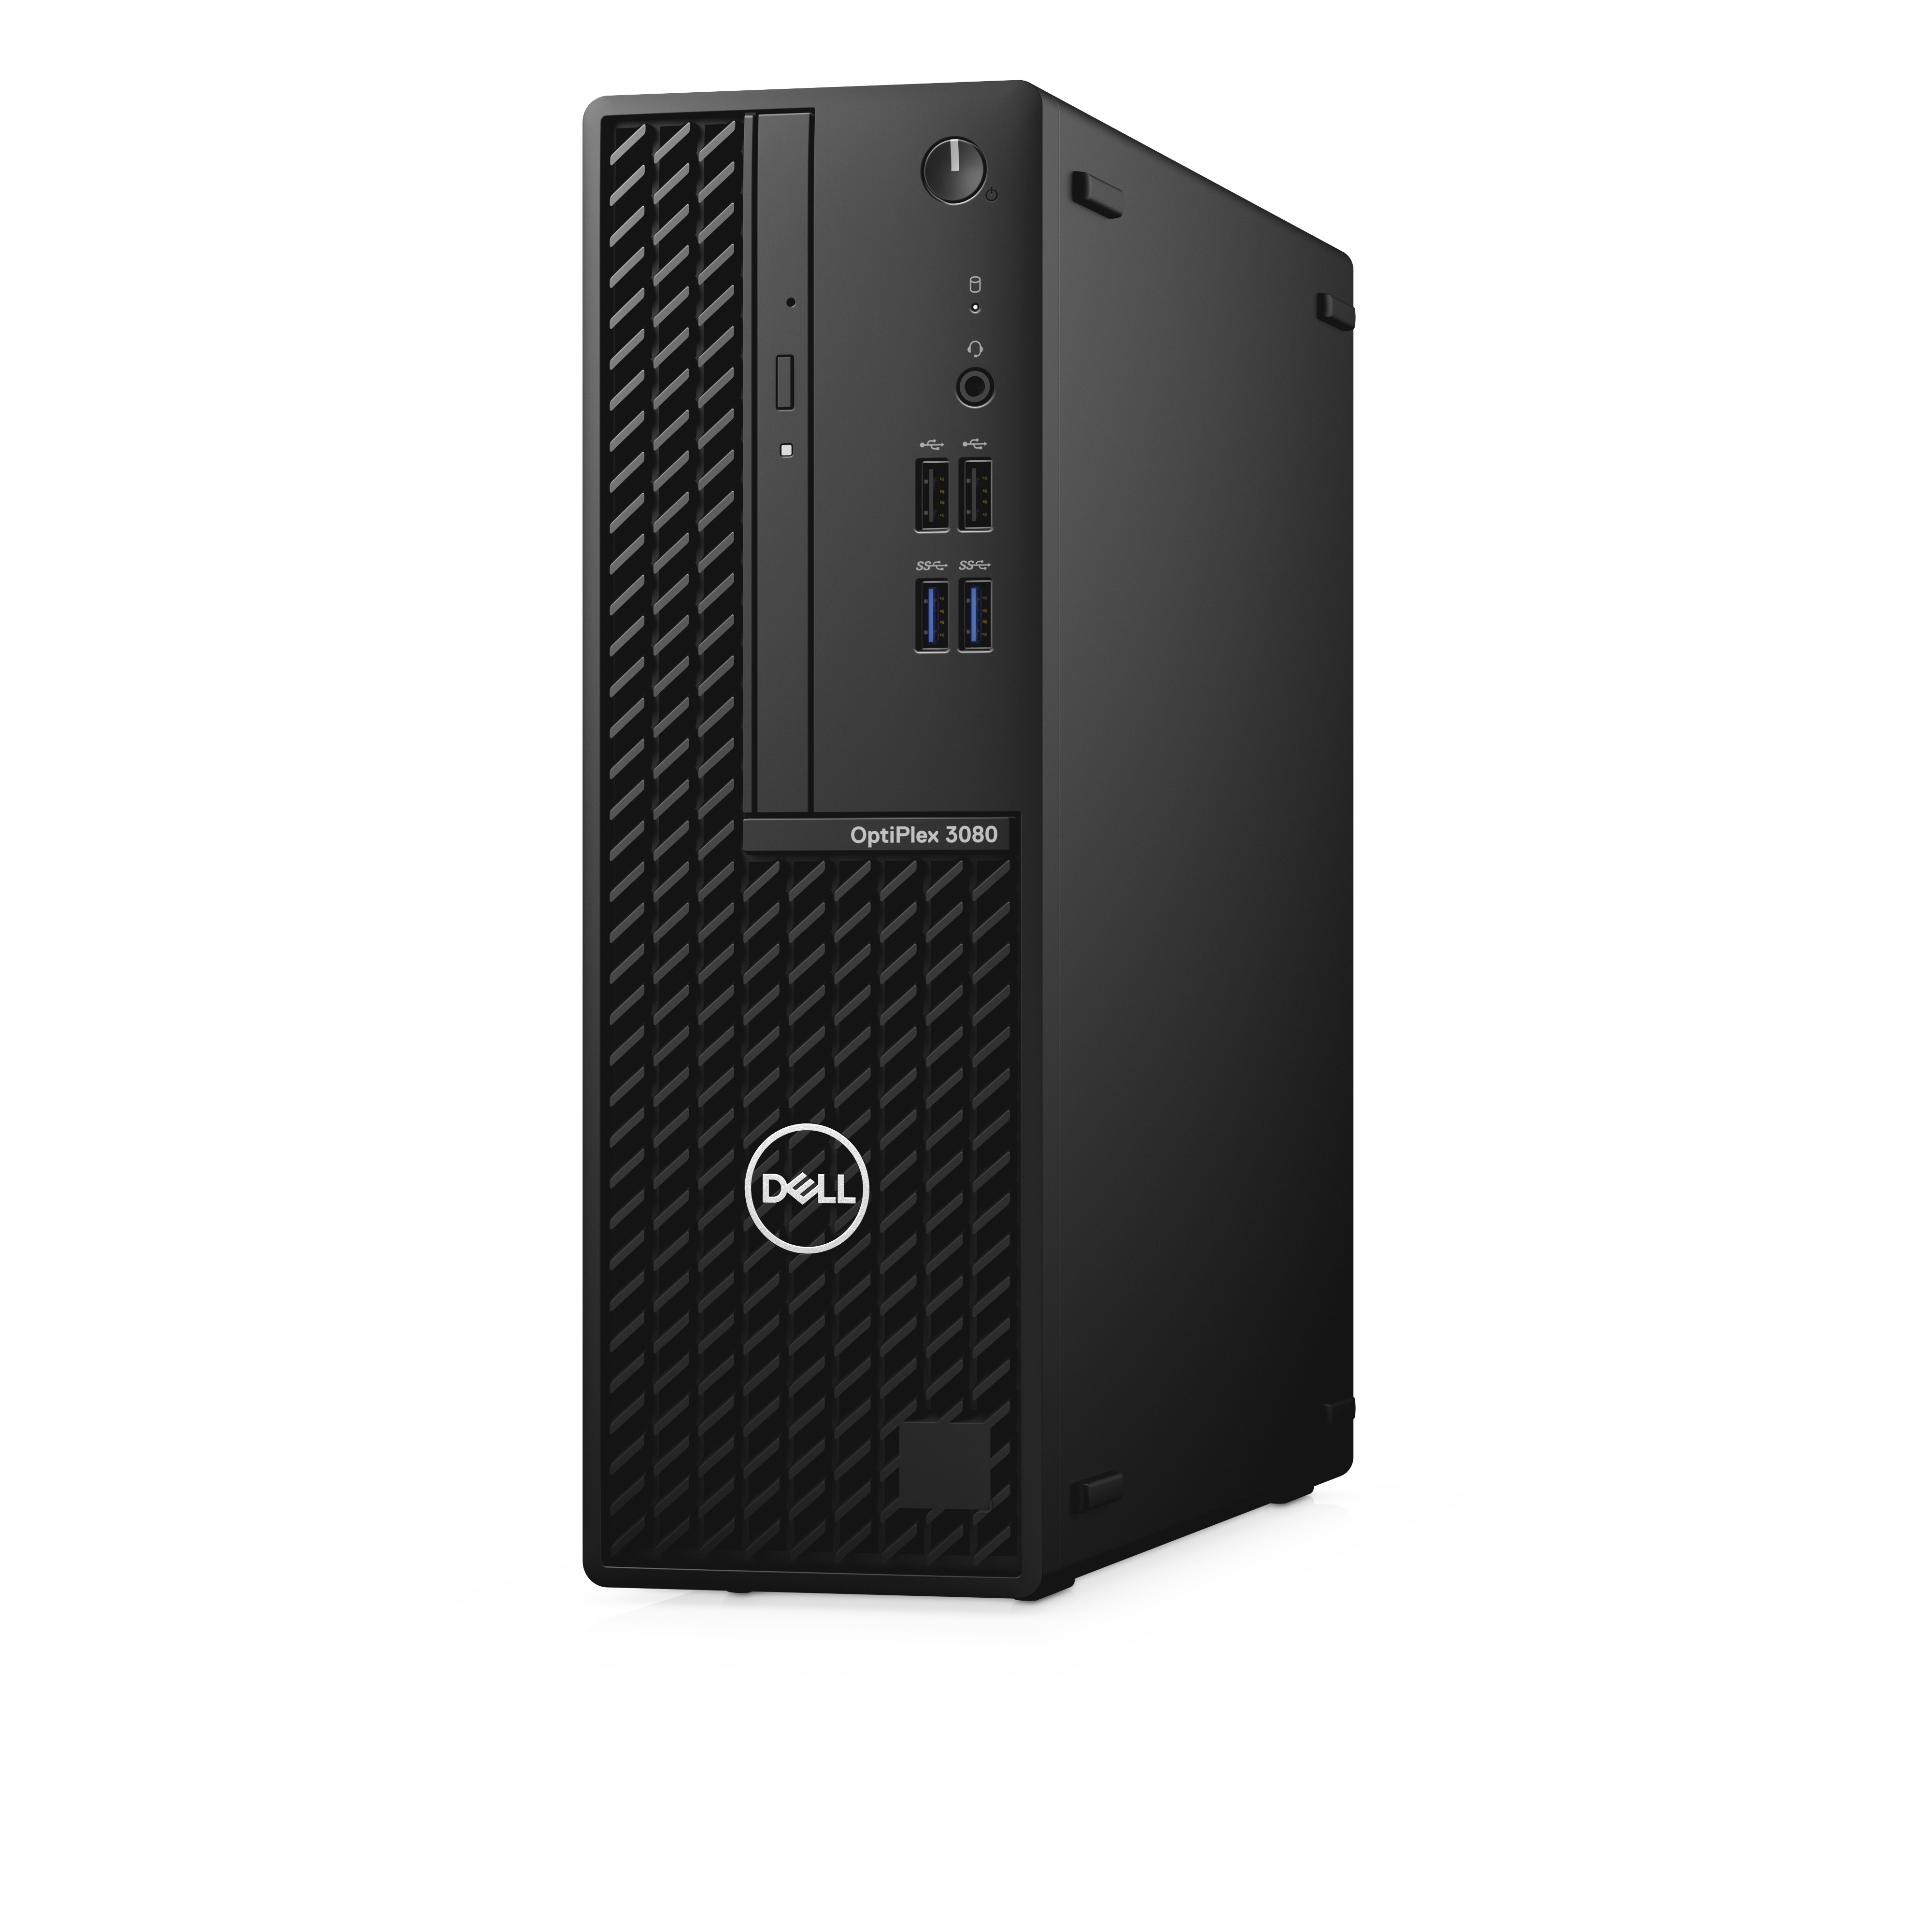 Optiplex 3080 Sff Core I5 10505 / 3.2 Ghz Ram 8 Gb Ssd 256 Gb Nvme, Class 35 Dvd-writer Uhd Graphics 630 Gige Win 10 Pro Monitor: None Keyboard: English Black Bts With 3 - image 2 of 4